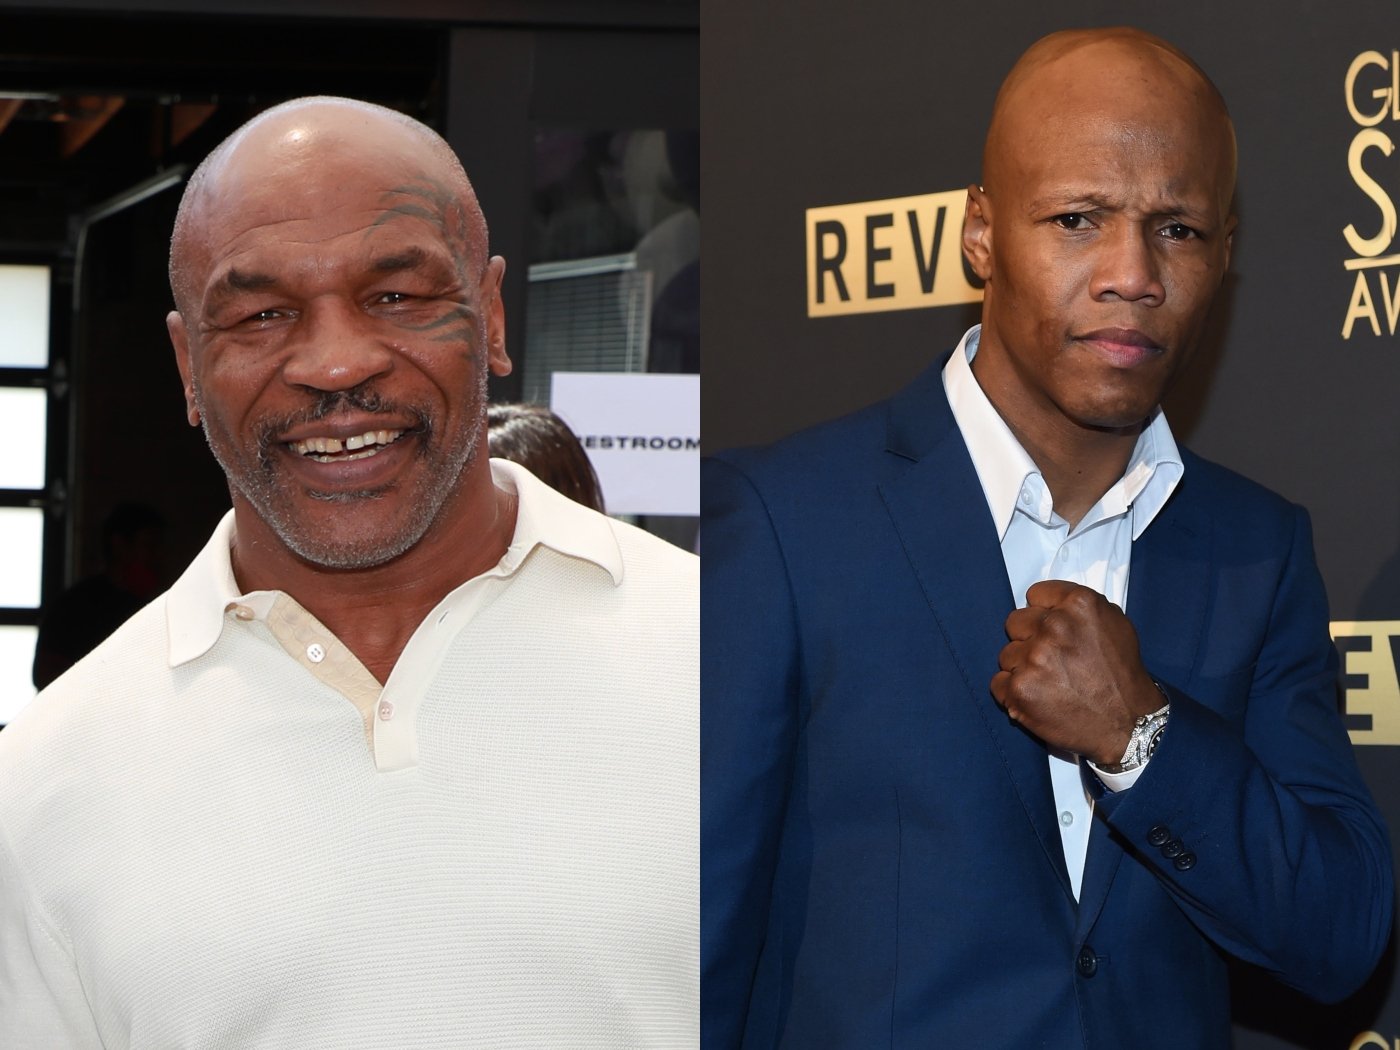 Mike Tyson attends the 100 Women Matter Luncheon in May 2021; Zab Judahattends 5th Annual REVOLT TV Global Spin Awards in 2017